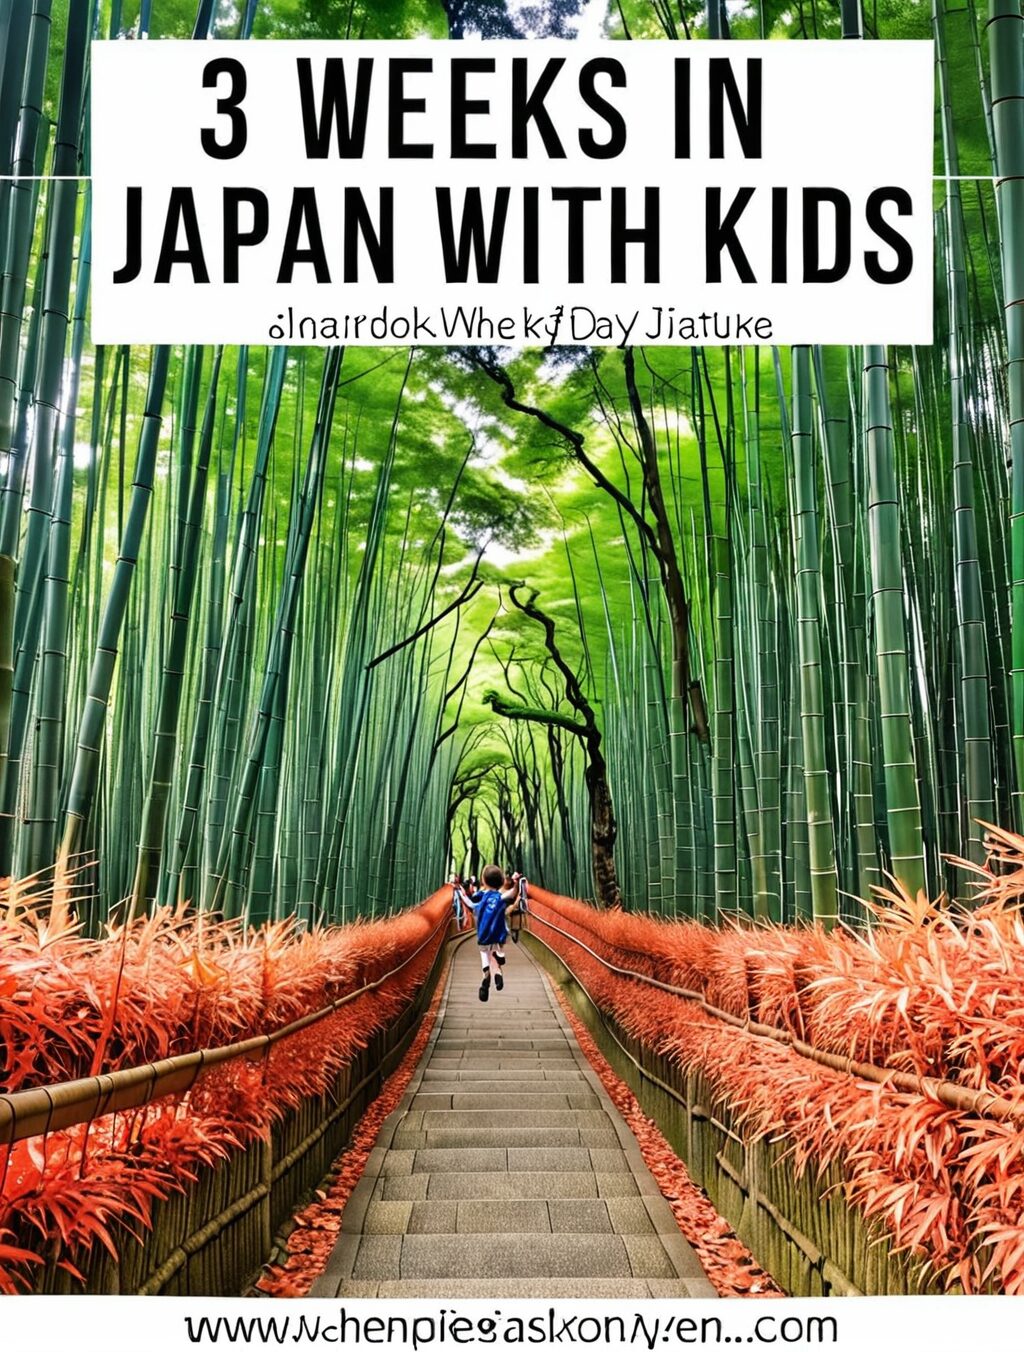 12 day japan itinerary with kids